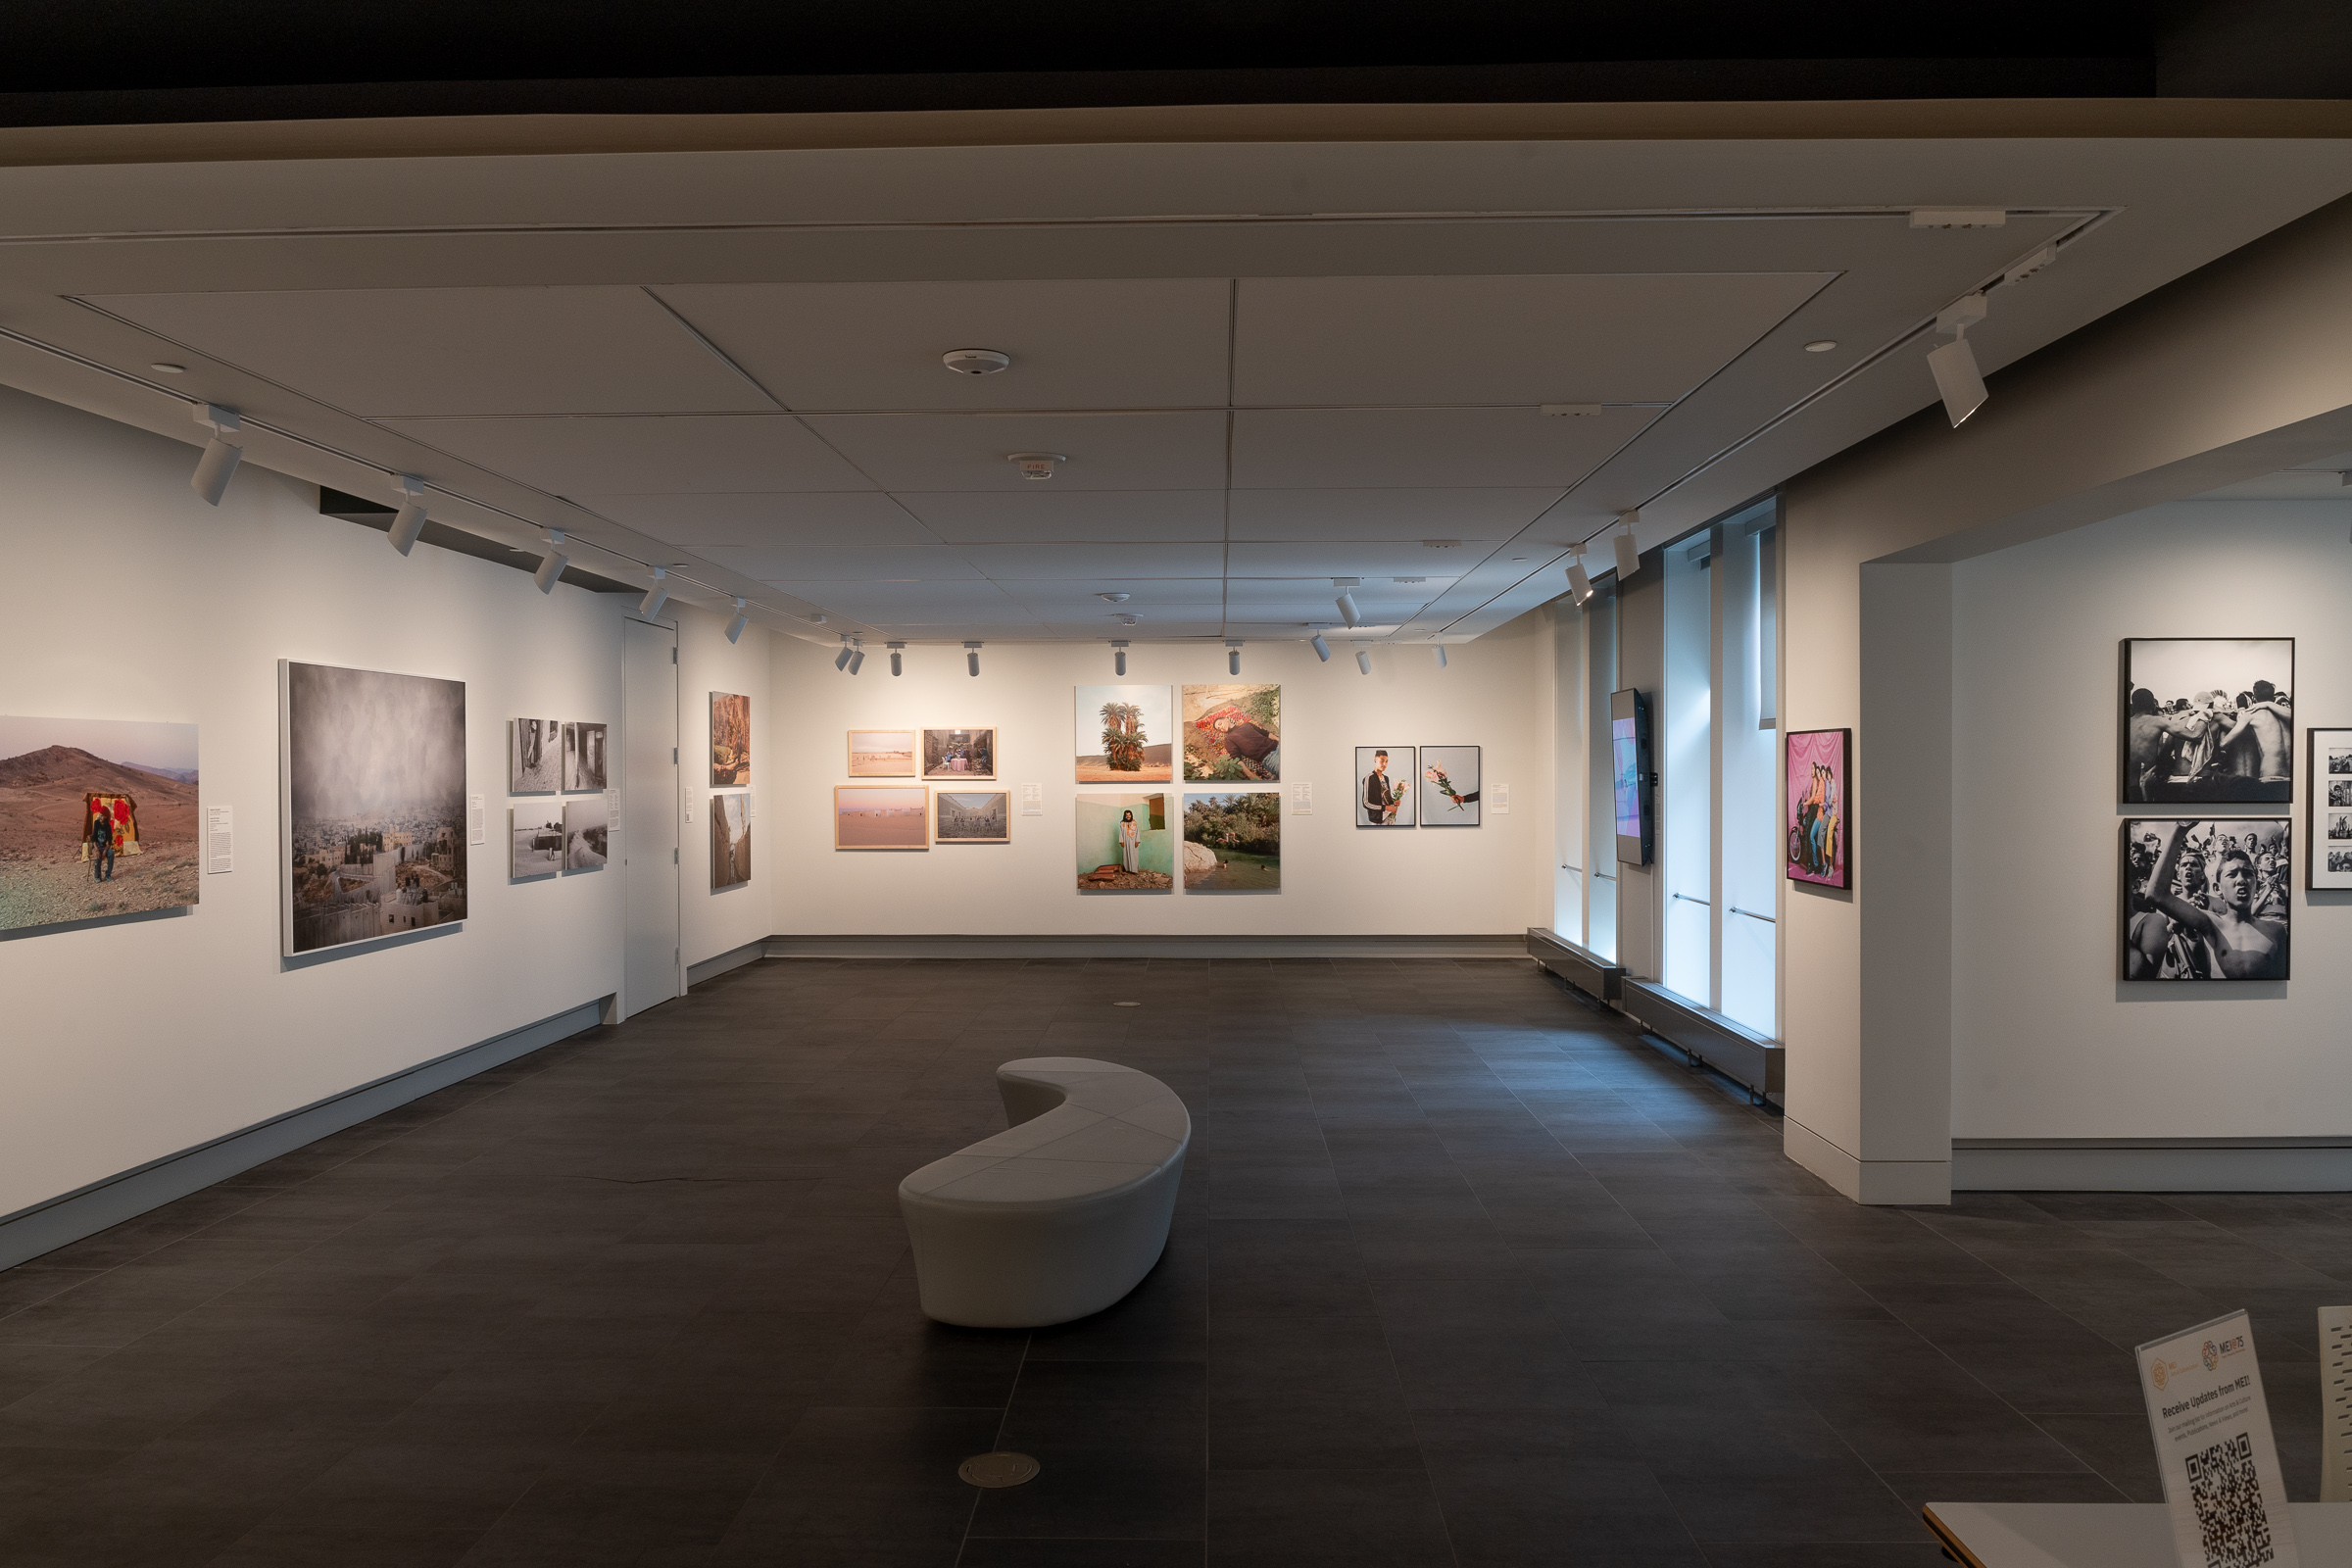 Installation view of an exhibition of photographs